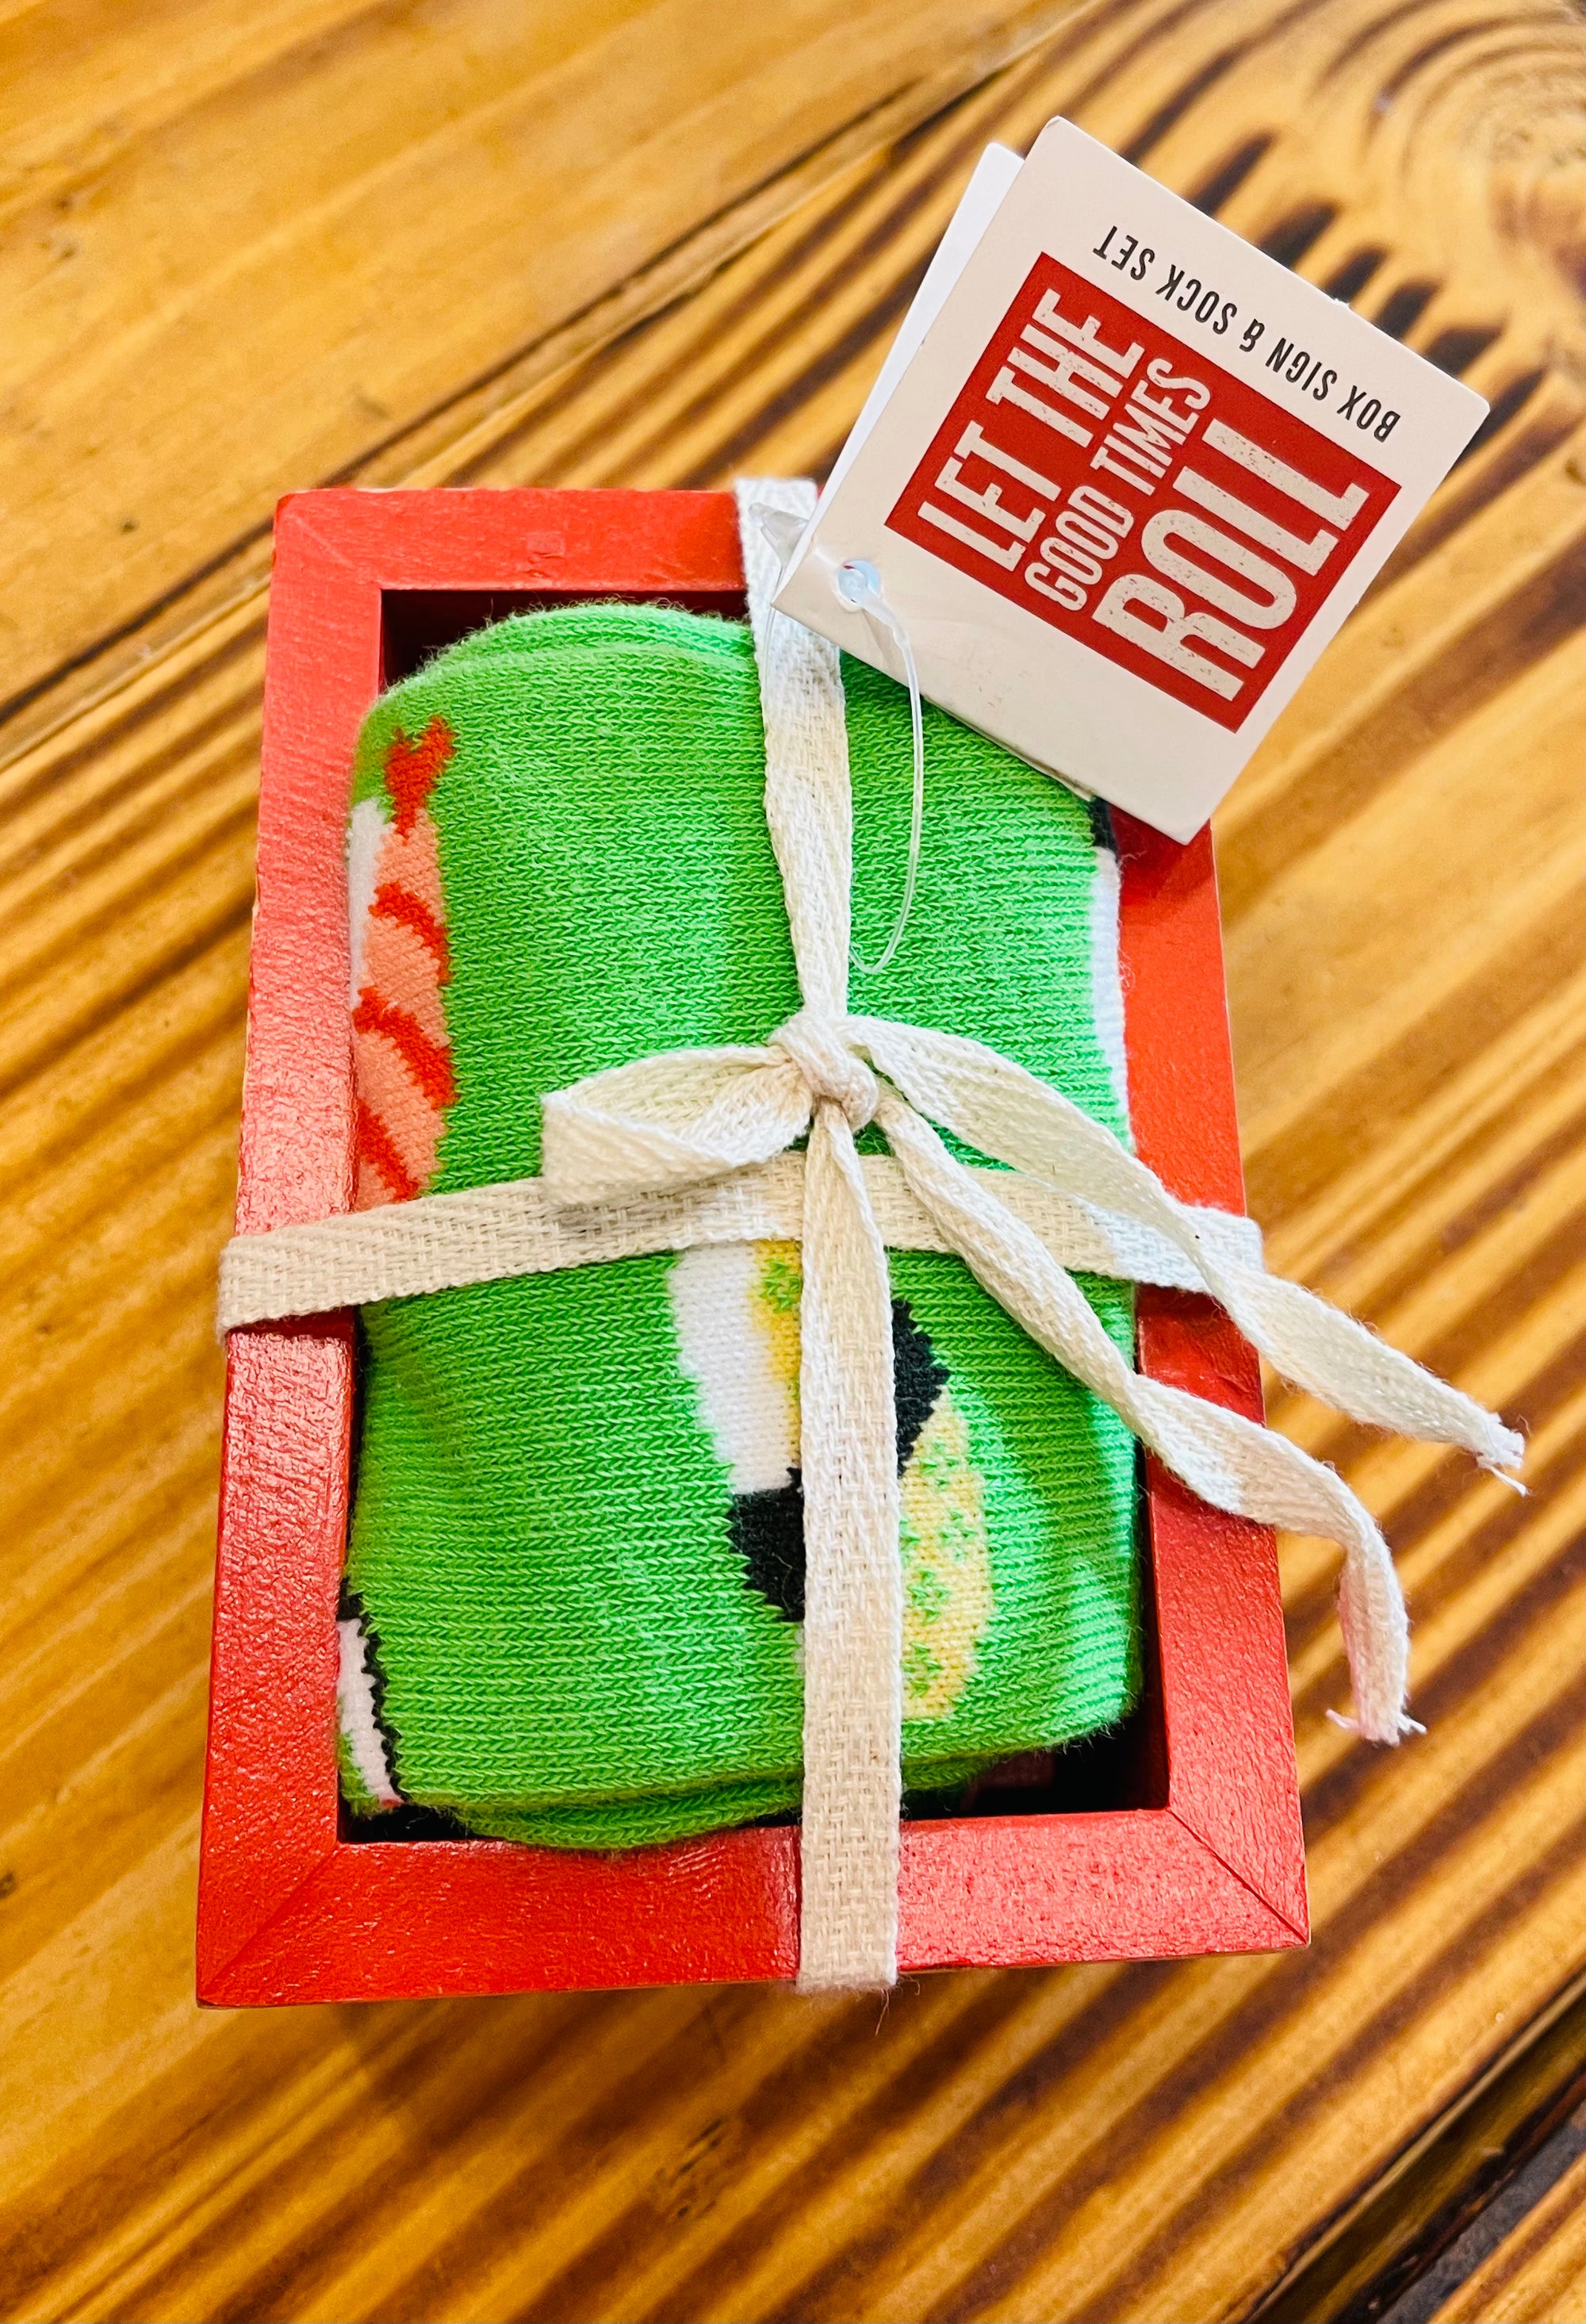 Let The Good Times Roll- Box Socks